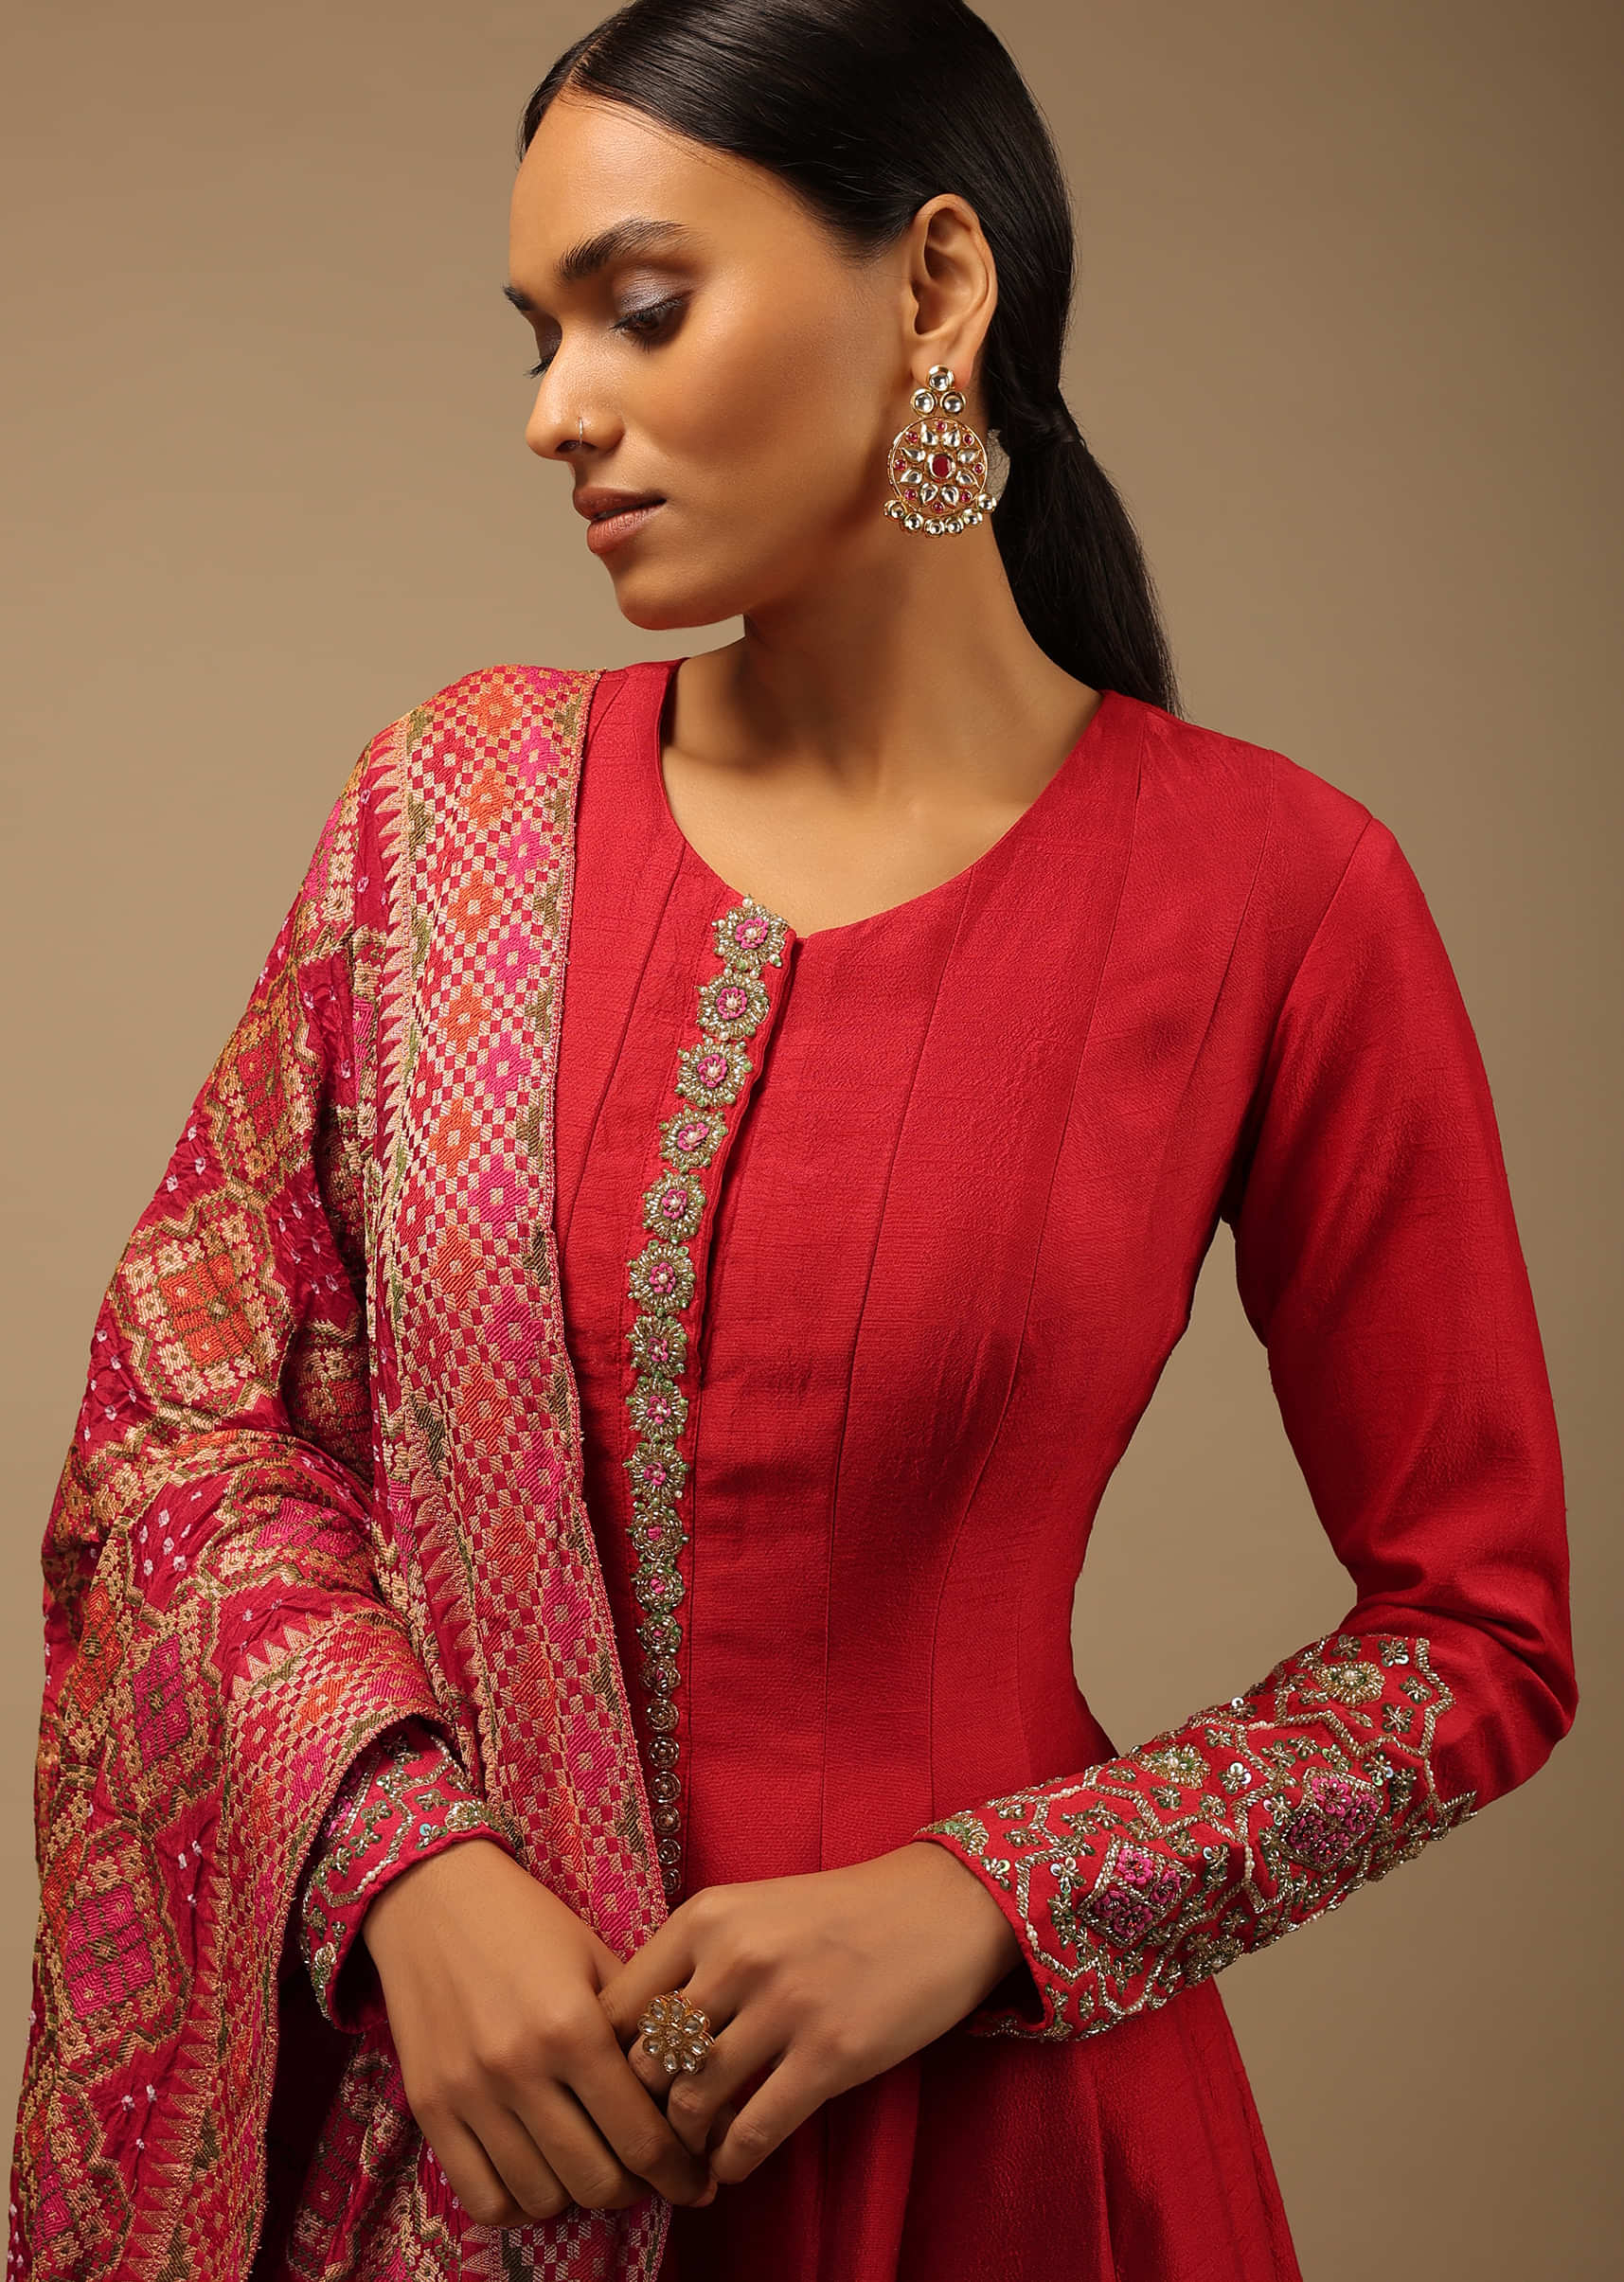 Red Anarkali Suit In Raw Silk With Hand Embroidery And A Brocade Dupatta Enhanced With Bandhani 